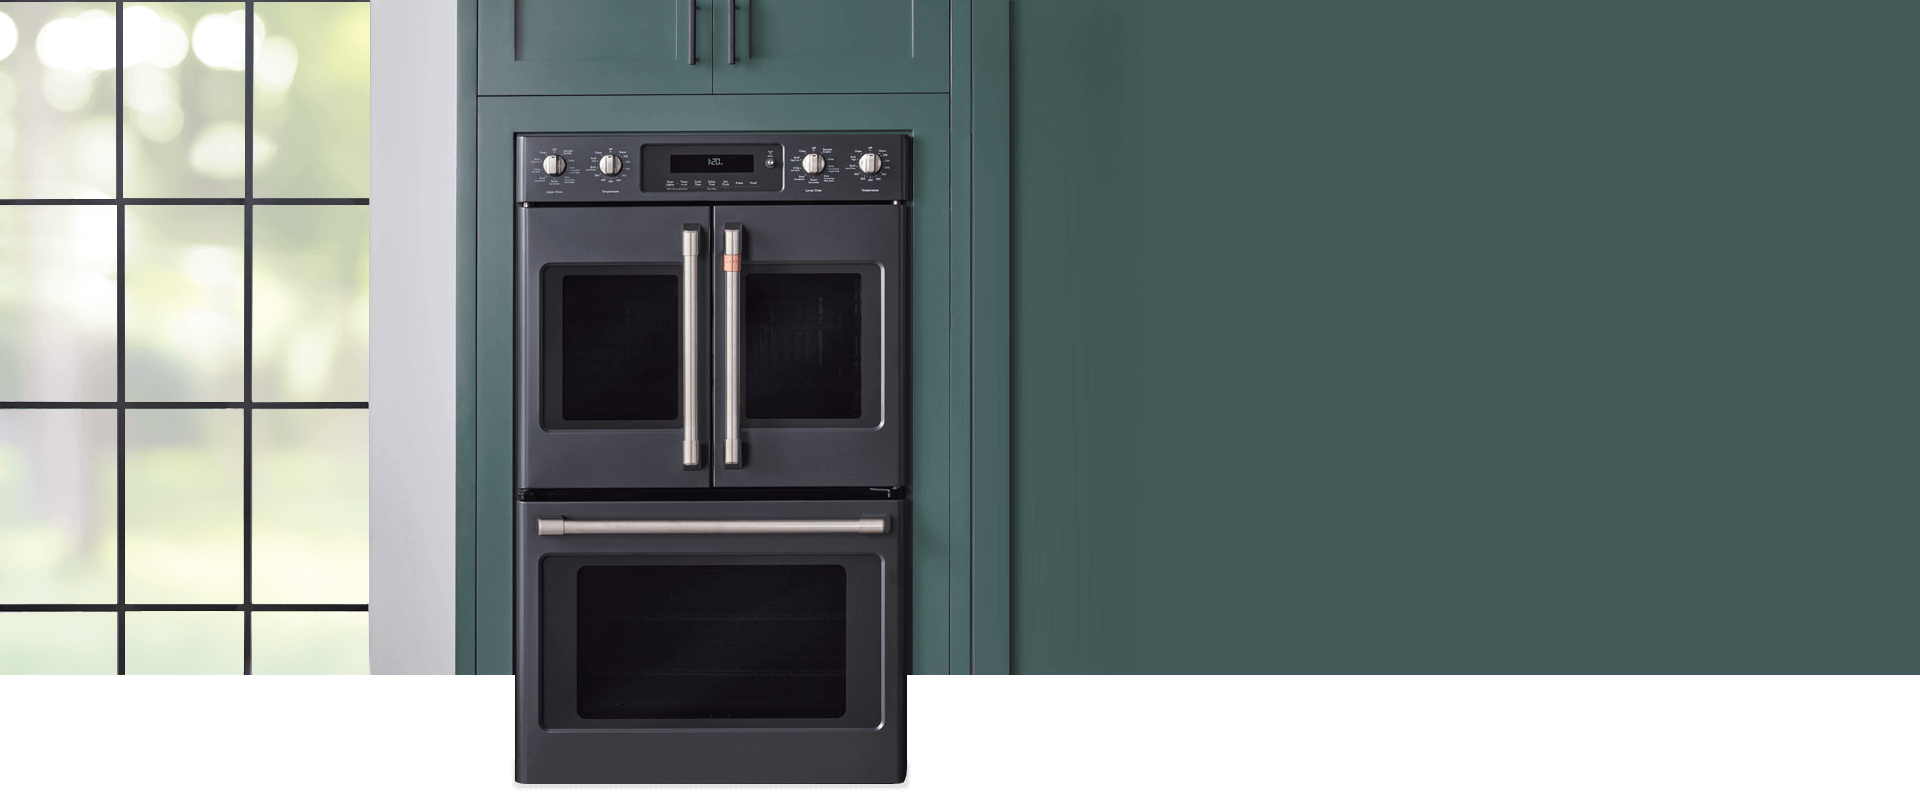 WALL OVENS